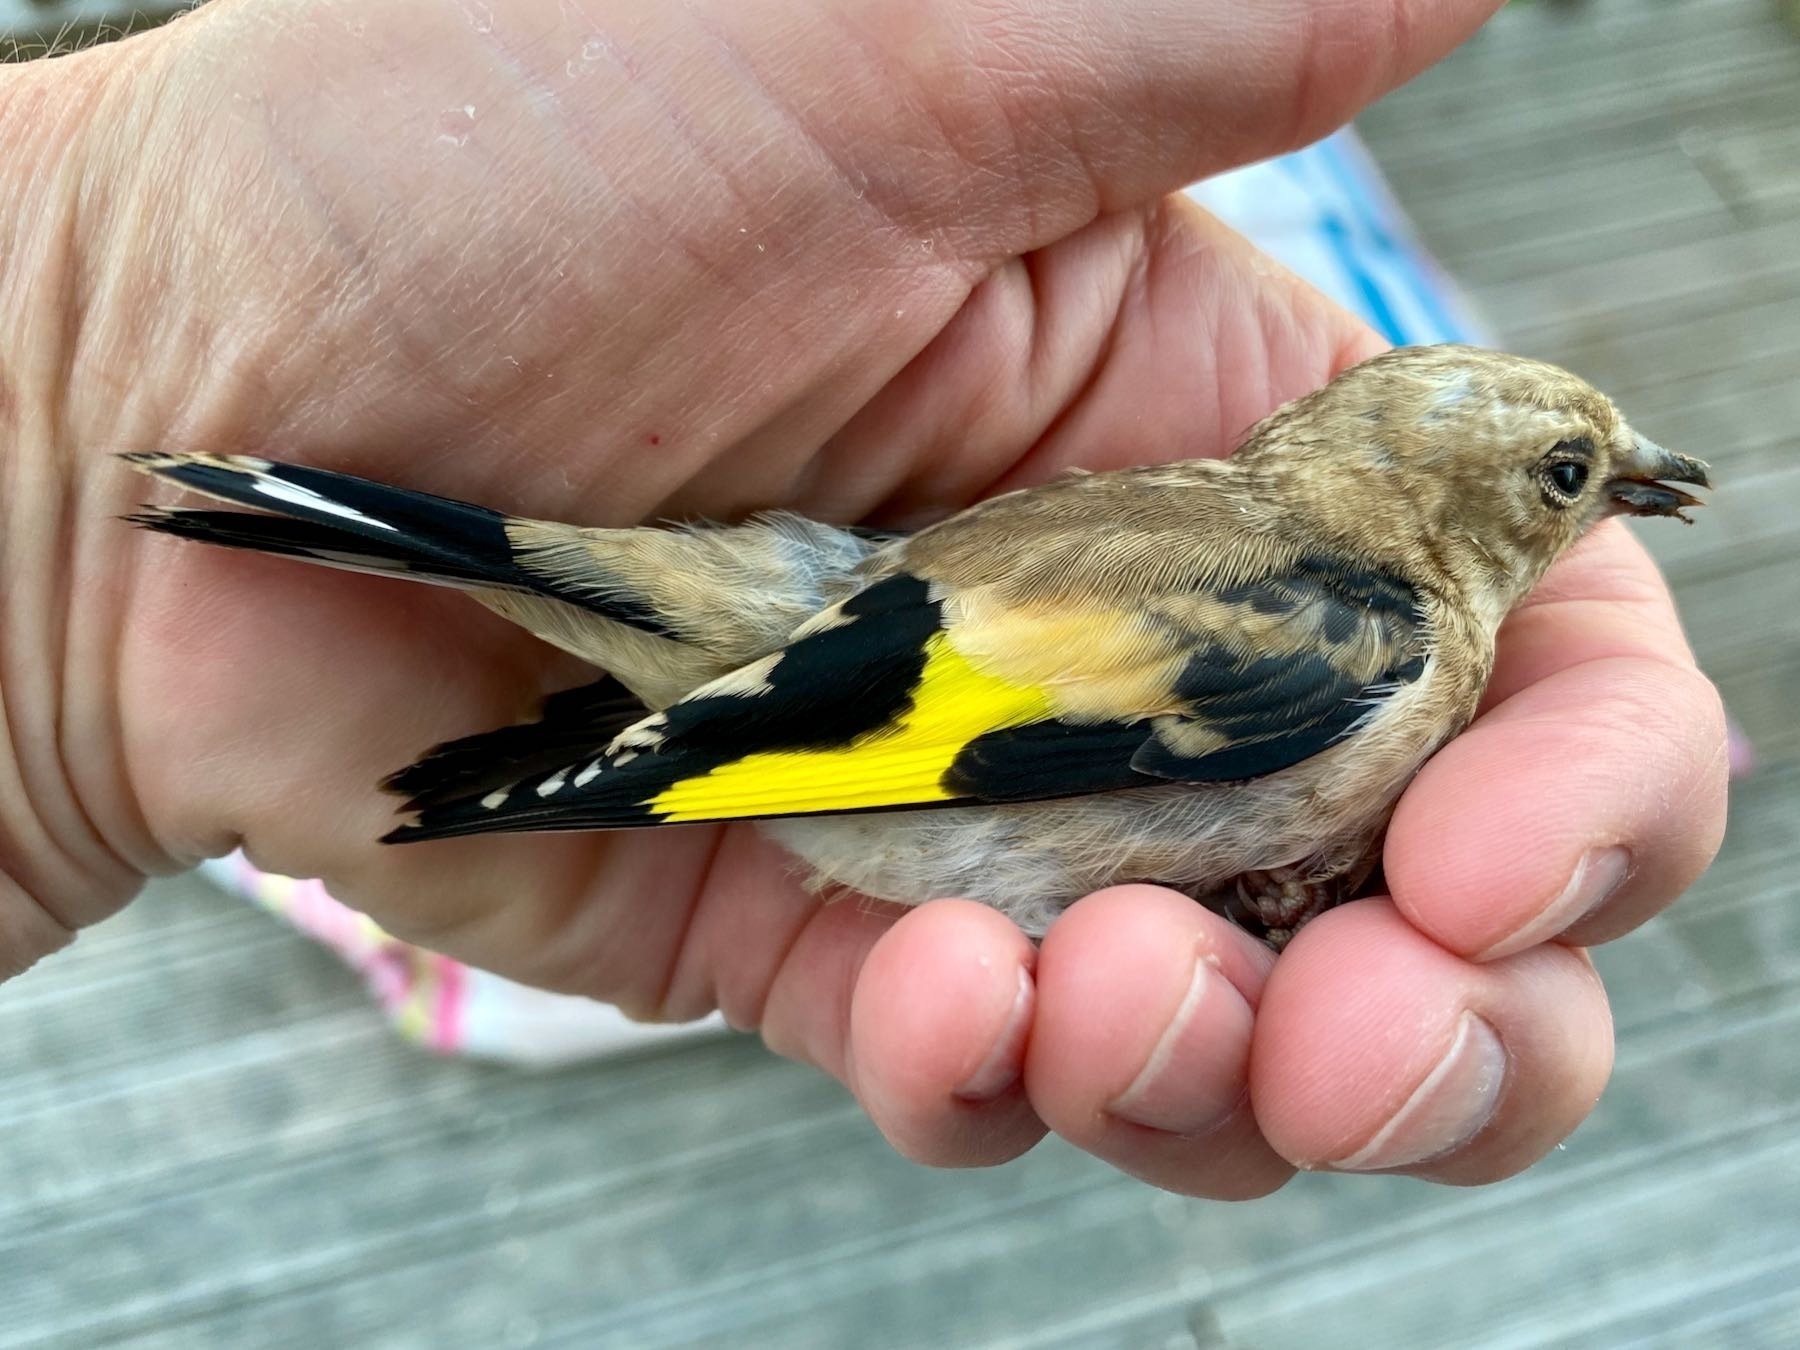 Small stunned bird in hand, with bright yellow wingbars. 